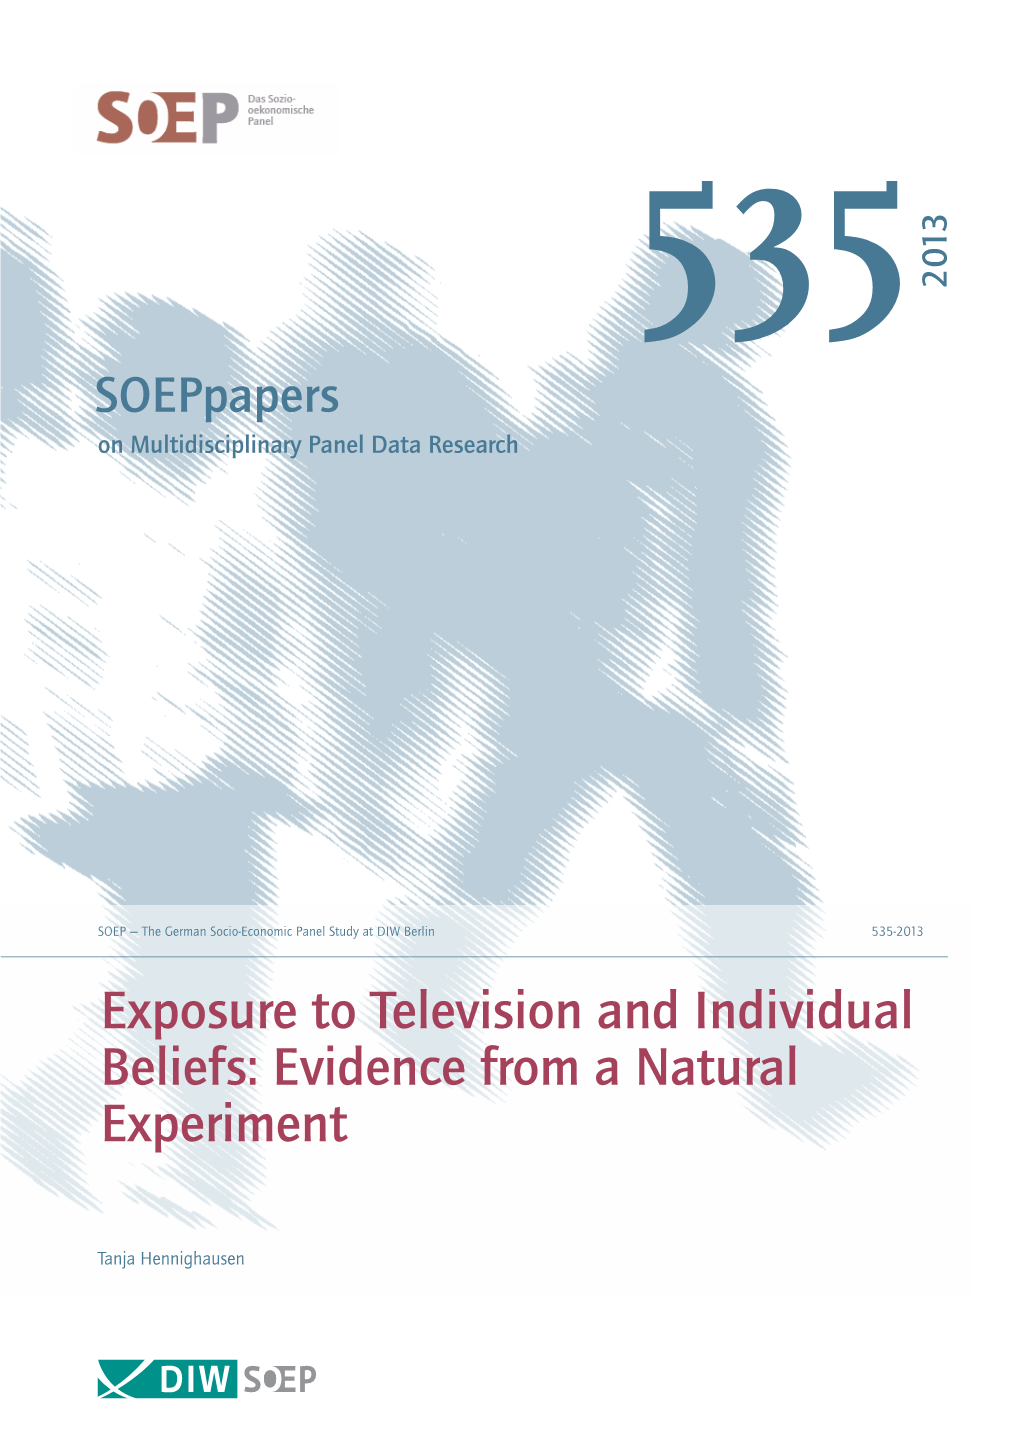 Exposure to Television and Individual Beliefs: Evidence from a Natural Experiment